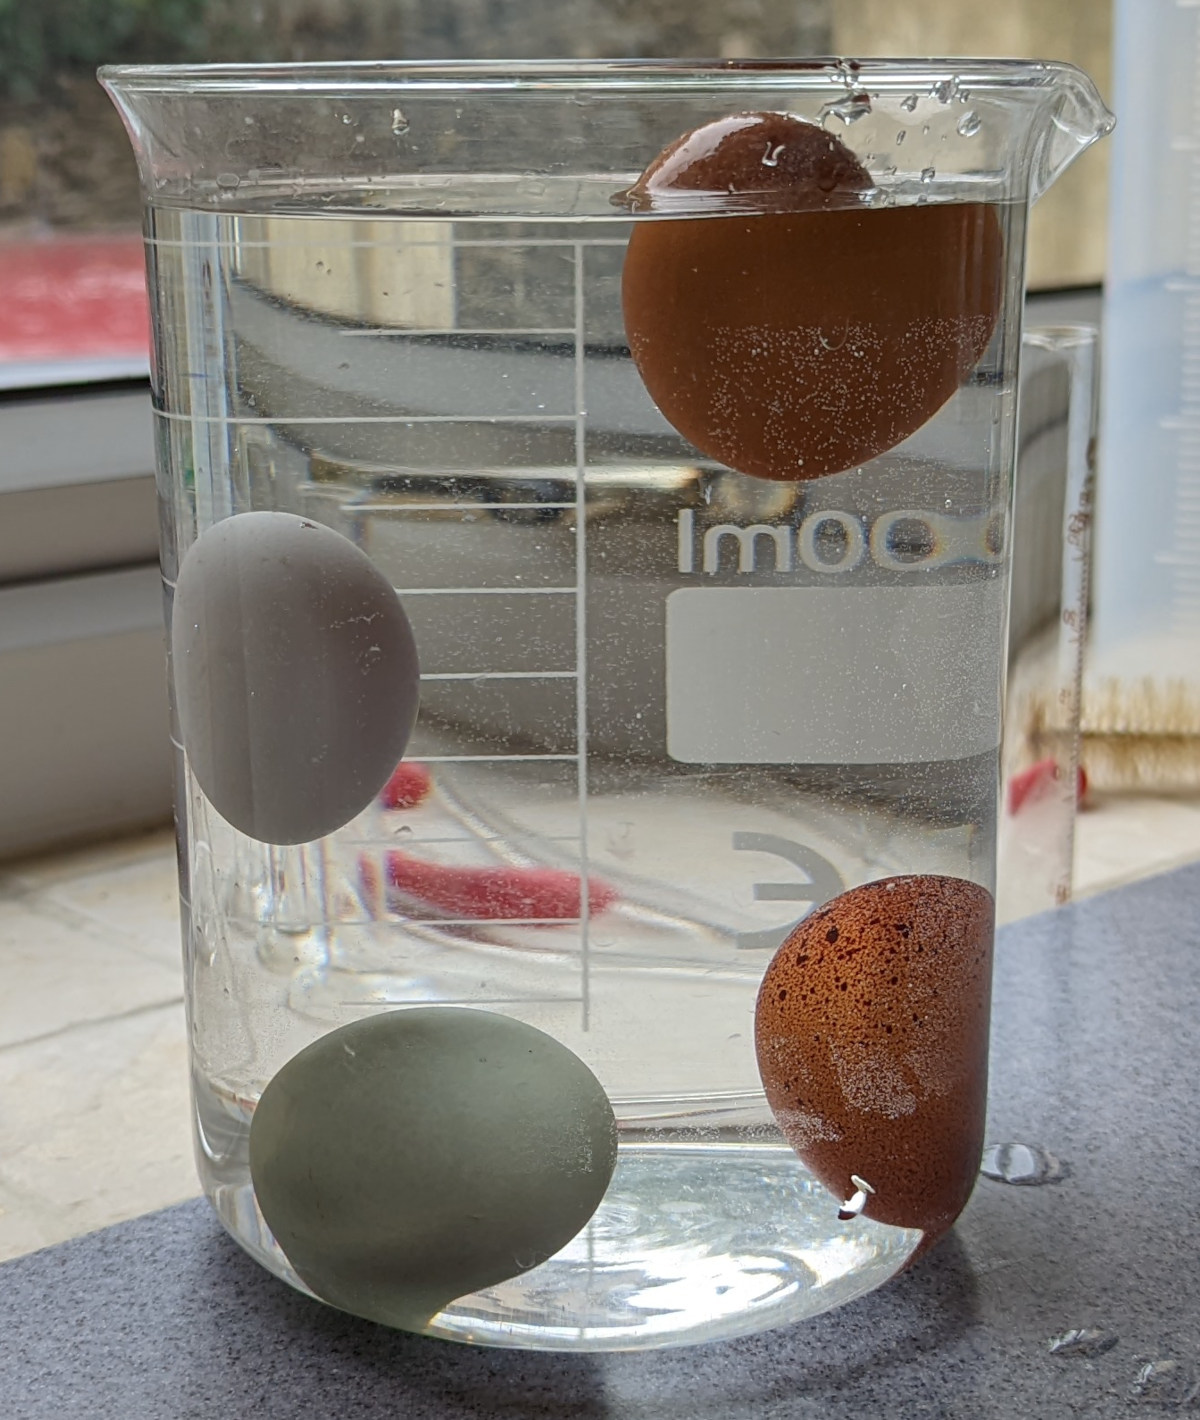 The floating egg method of testing the freshness of eggs with the results.